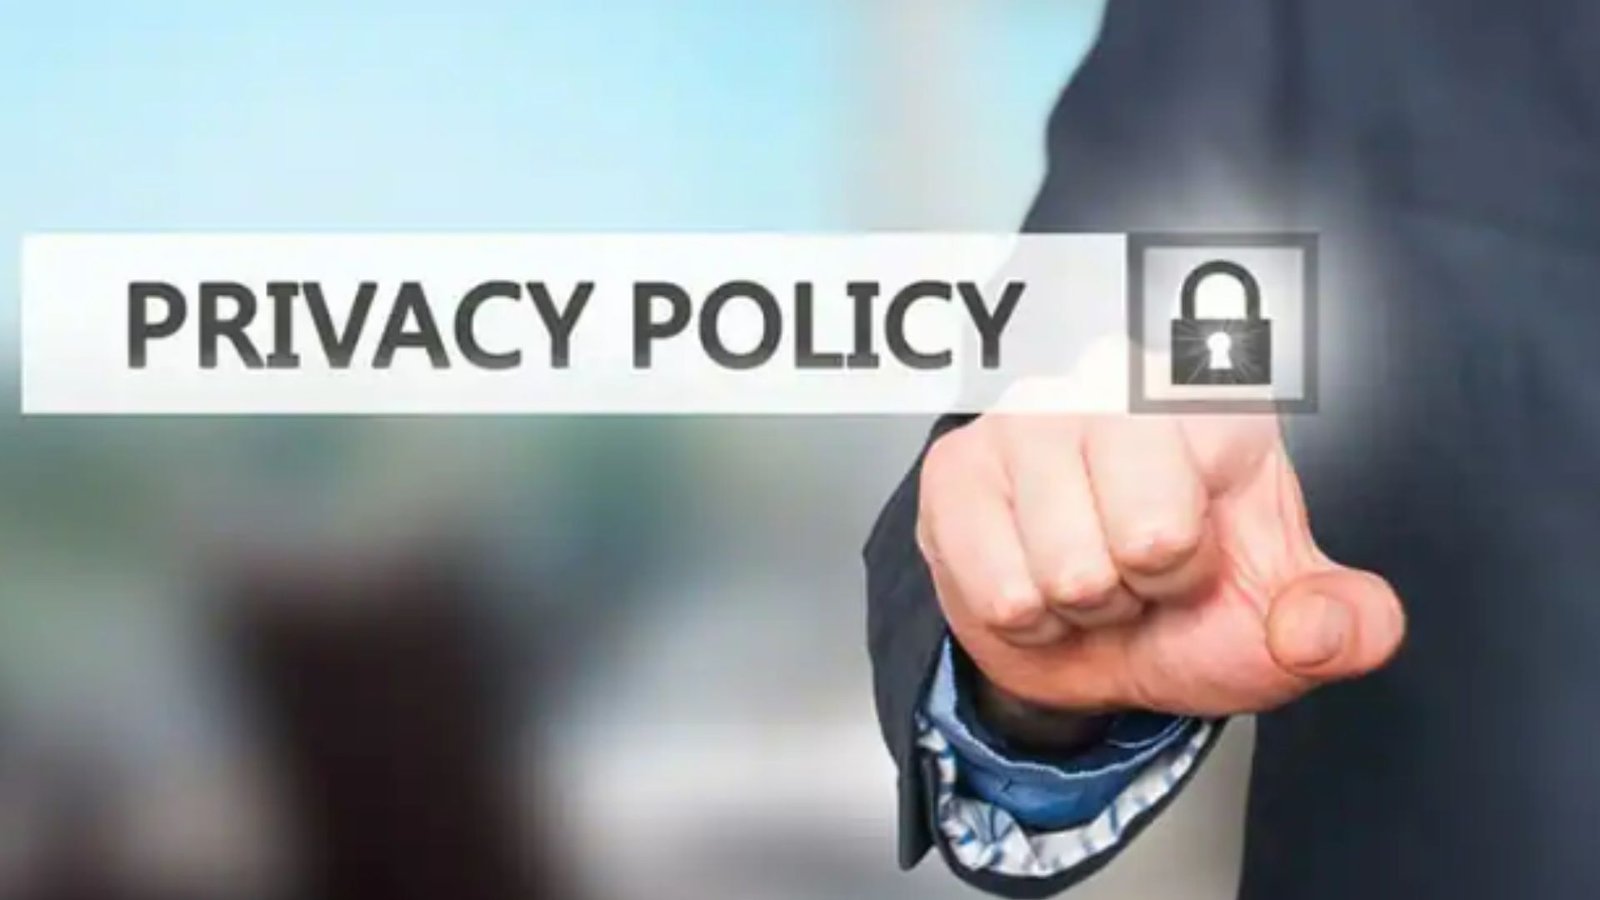 a man wearing a black suit pointing at a text written privacy policy